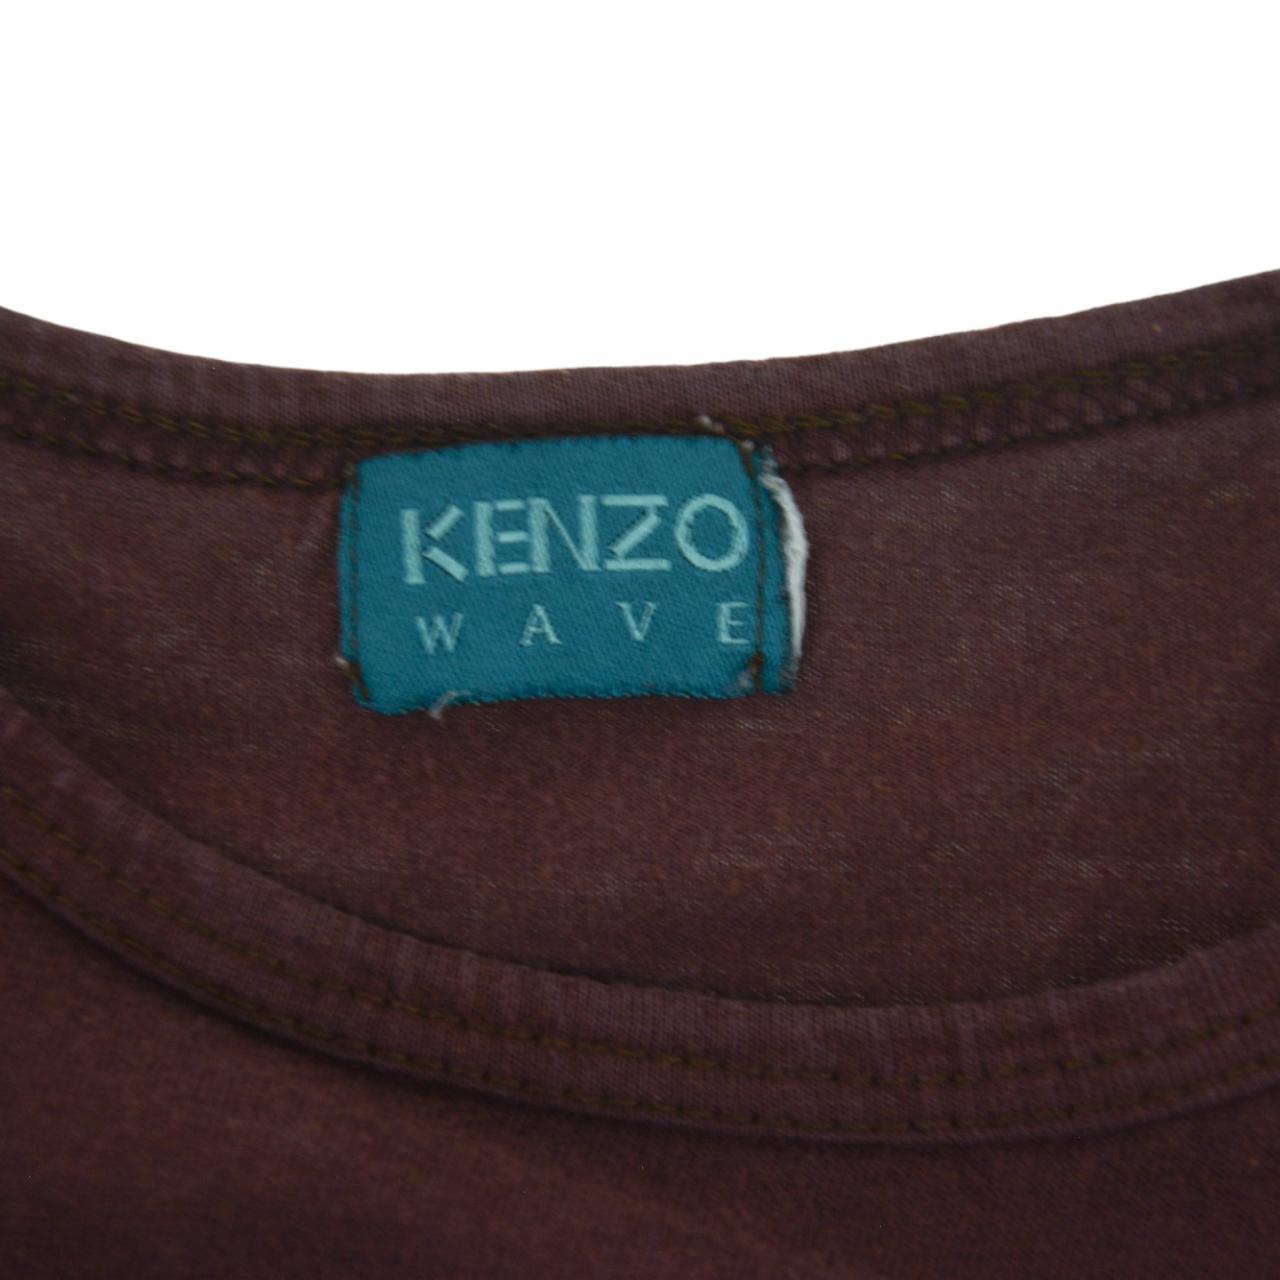 Vintage Kenzo Wave T Shirt Size S - Known Source